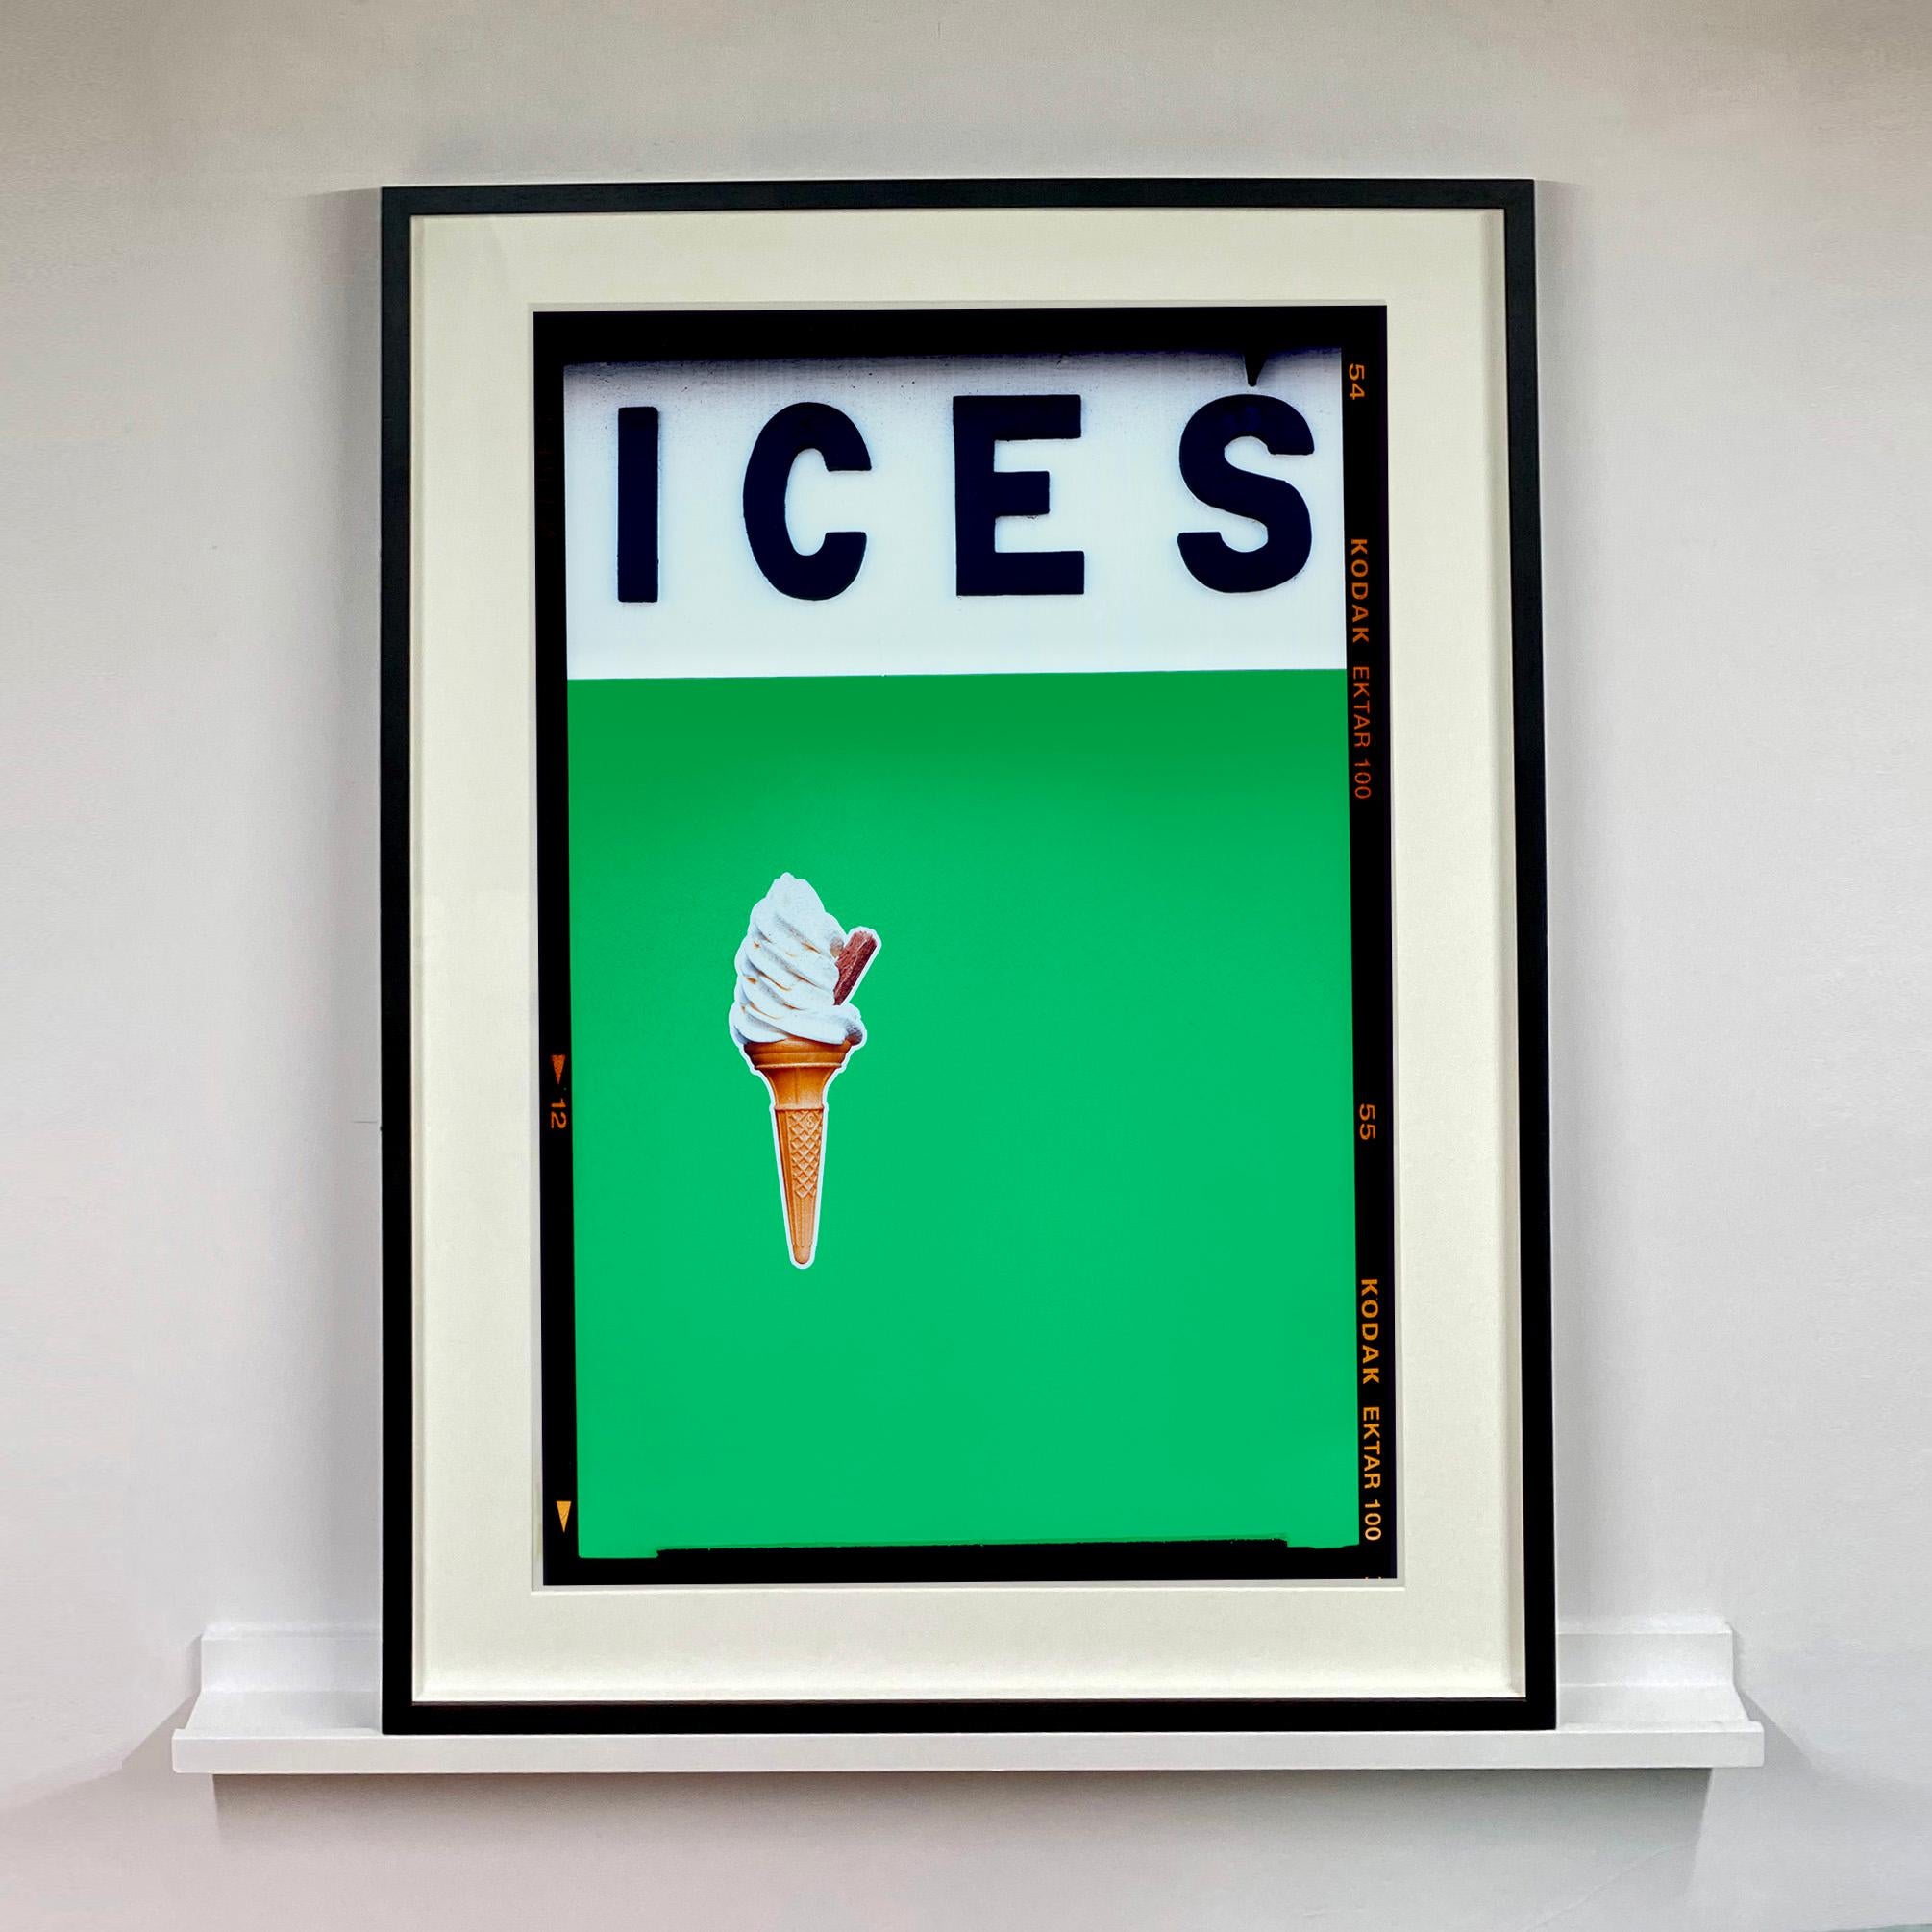 ICES (Green), Bexhill-on-Sea - British seaside color photography - Contemporary Photograph by Richard Heeps